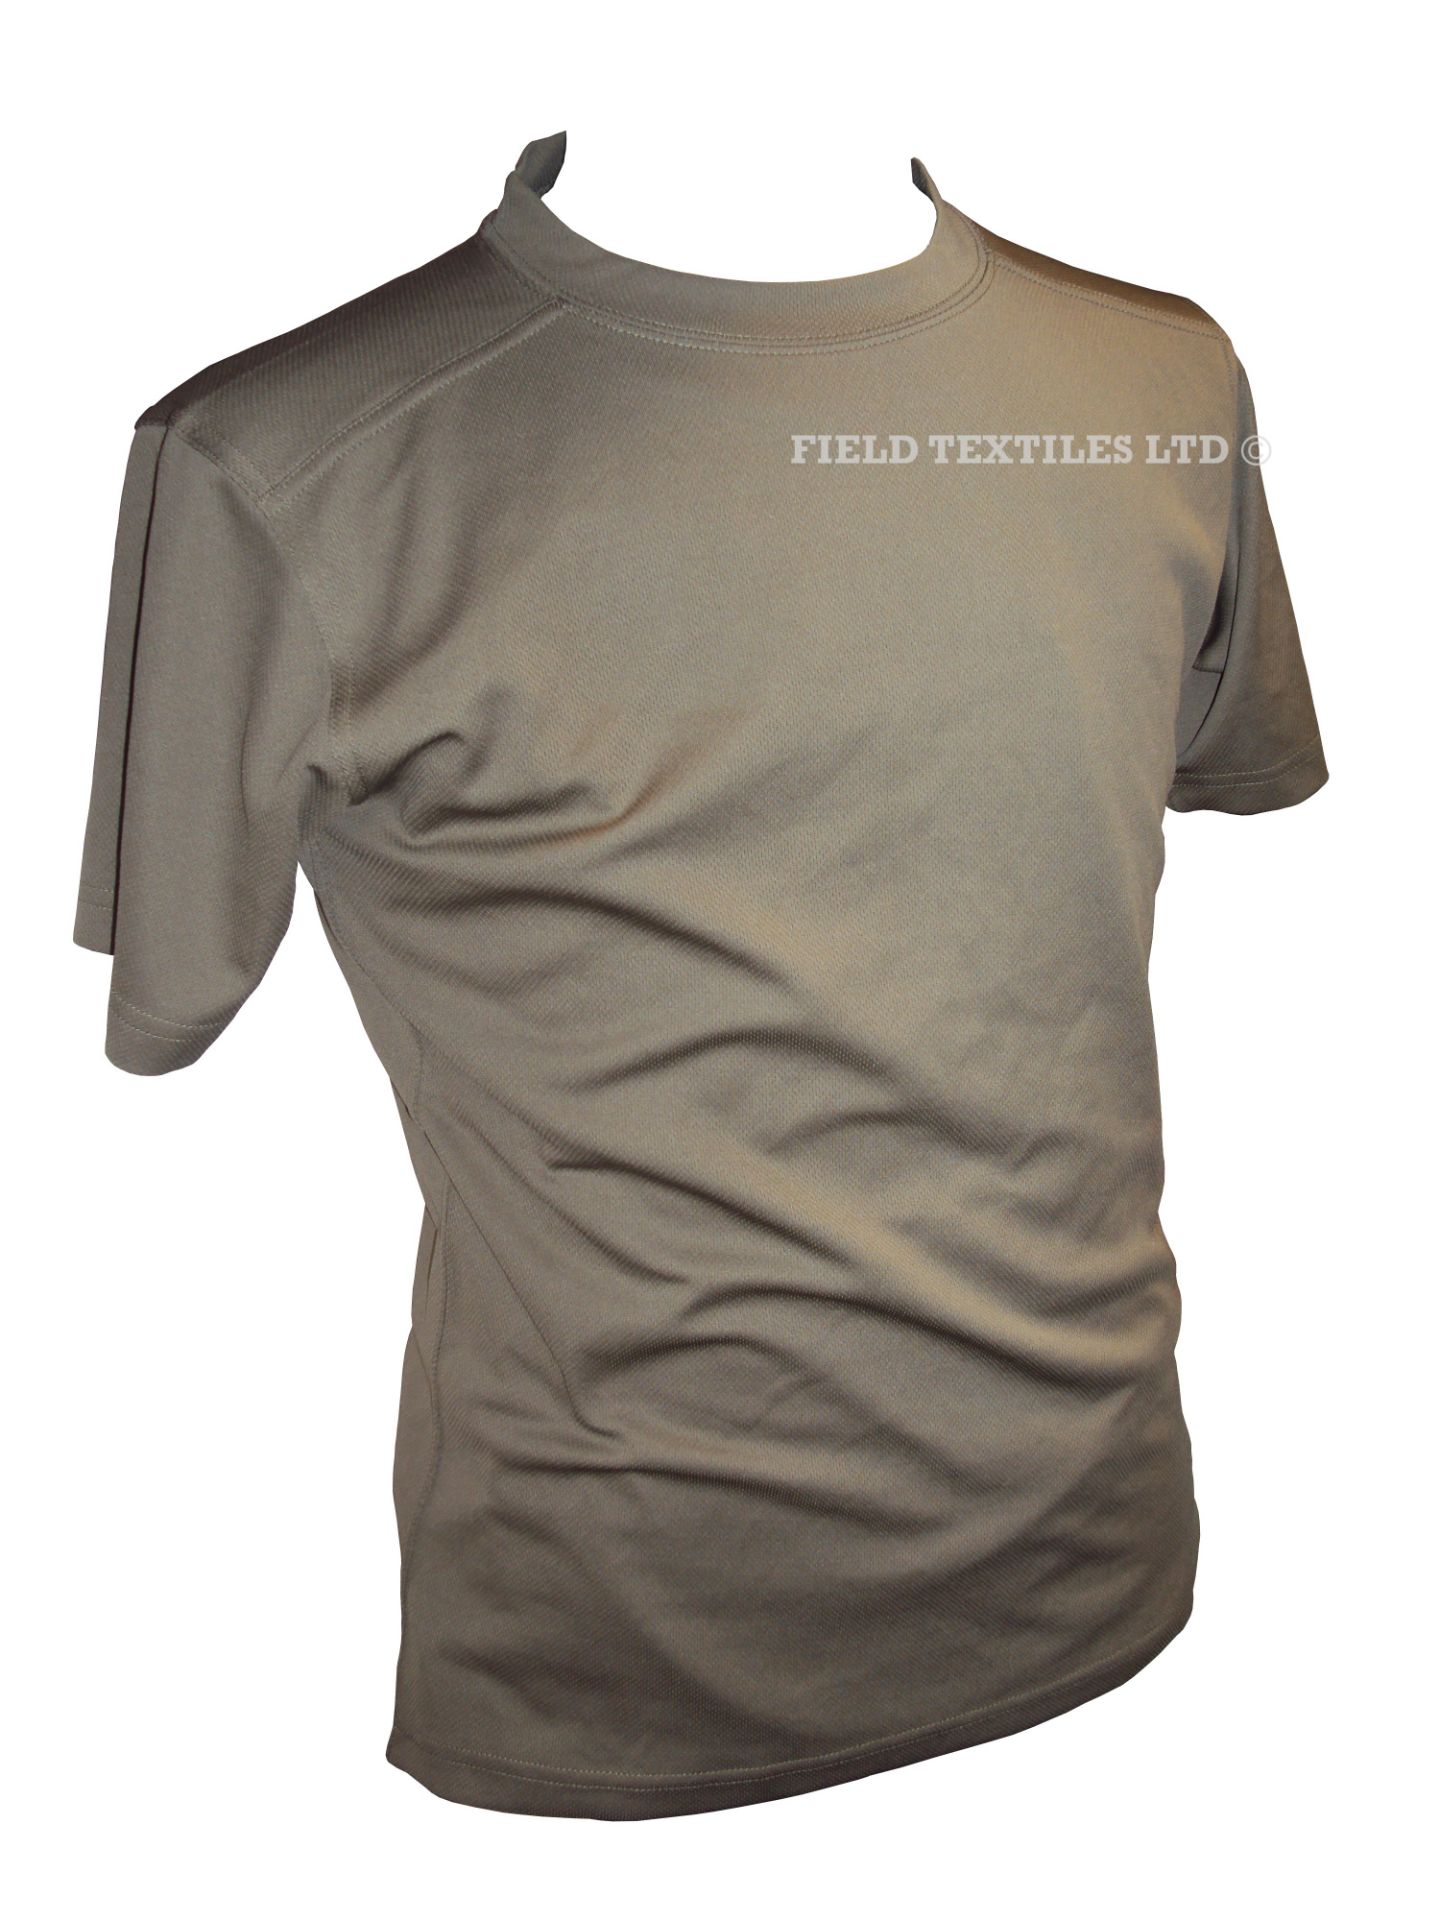 Pack of 30 - MTP Light Olive Self-Wicking T-Shirts - Mix of Sizes - Grade 1